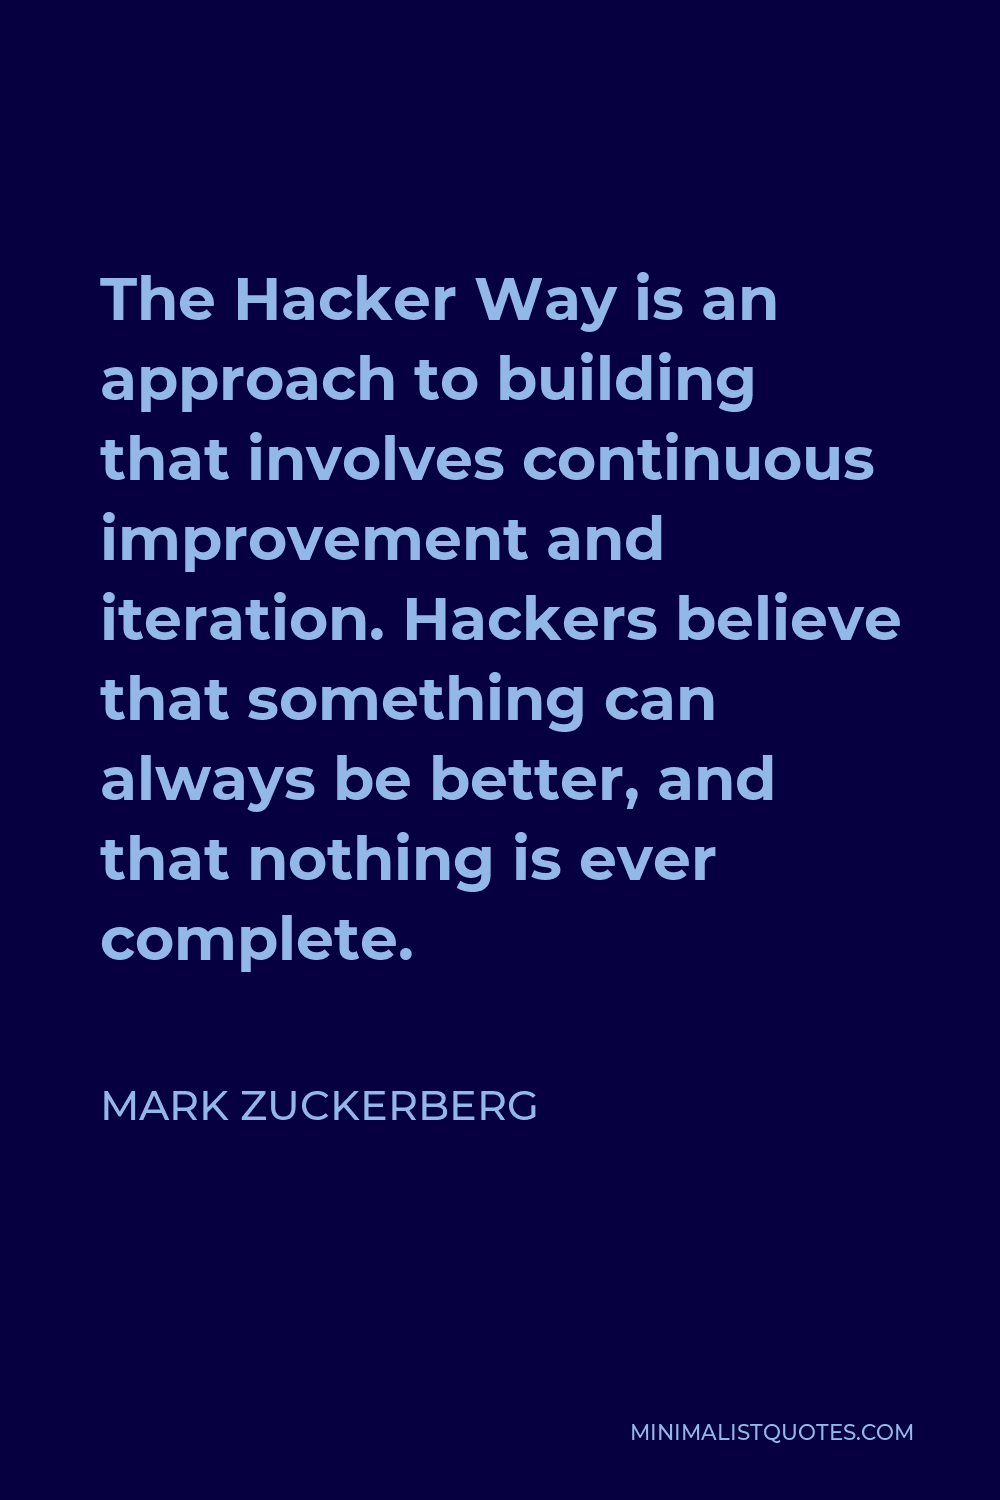 Mark Zuckerberg Quote - The Hacker Way is an approach to building that involves continuous improvement and iteration. Hackers believe that something can always be better, and that nothing is ever complete.